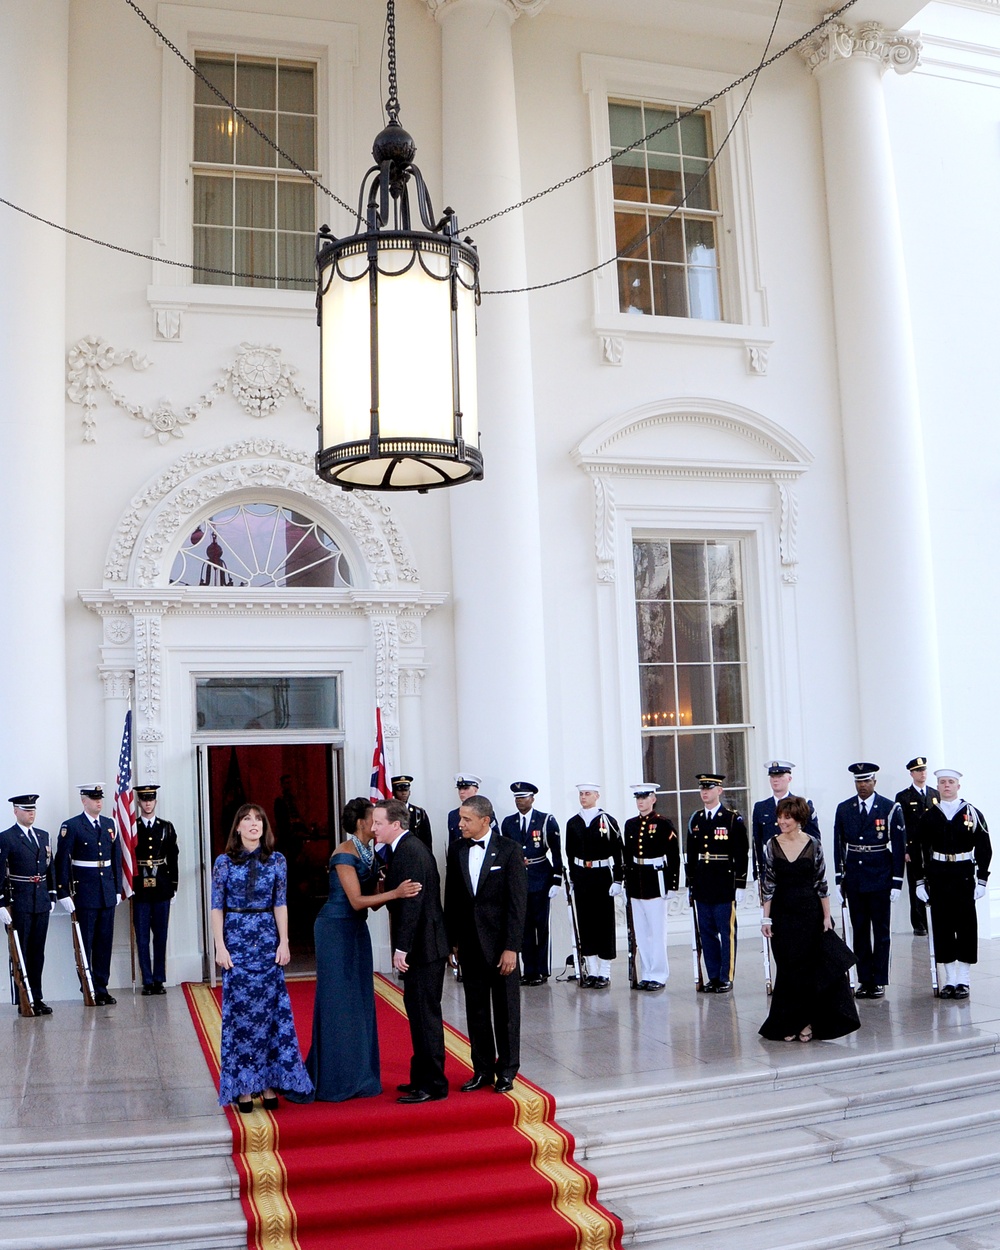 Armed Forces Full Honor Cordon and State Dinner for United Kingdom